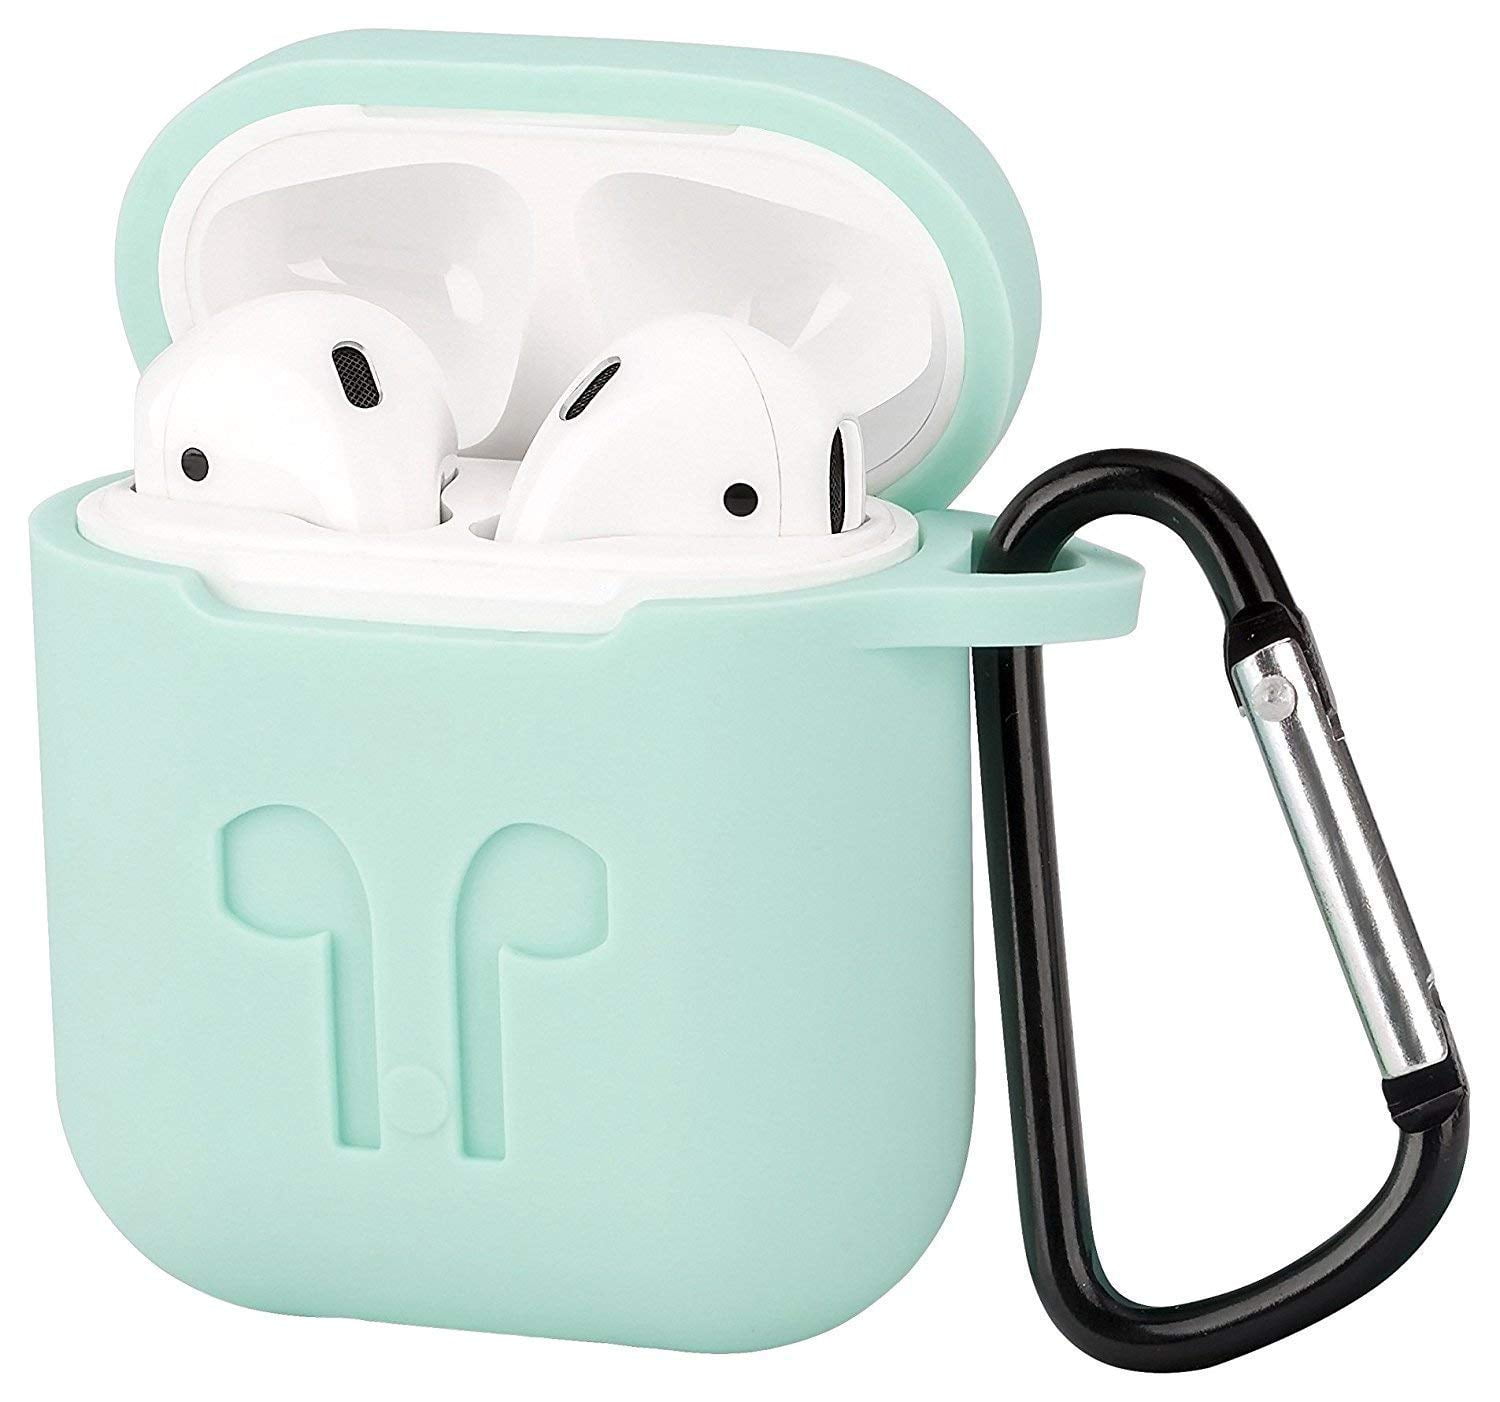 Newest Soft Silicone Case For Apple Airpods Accessories